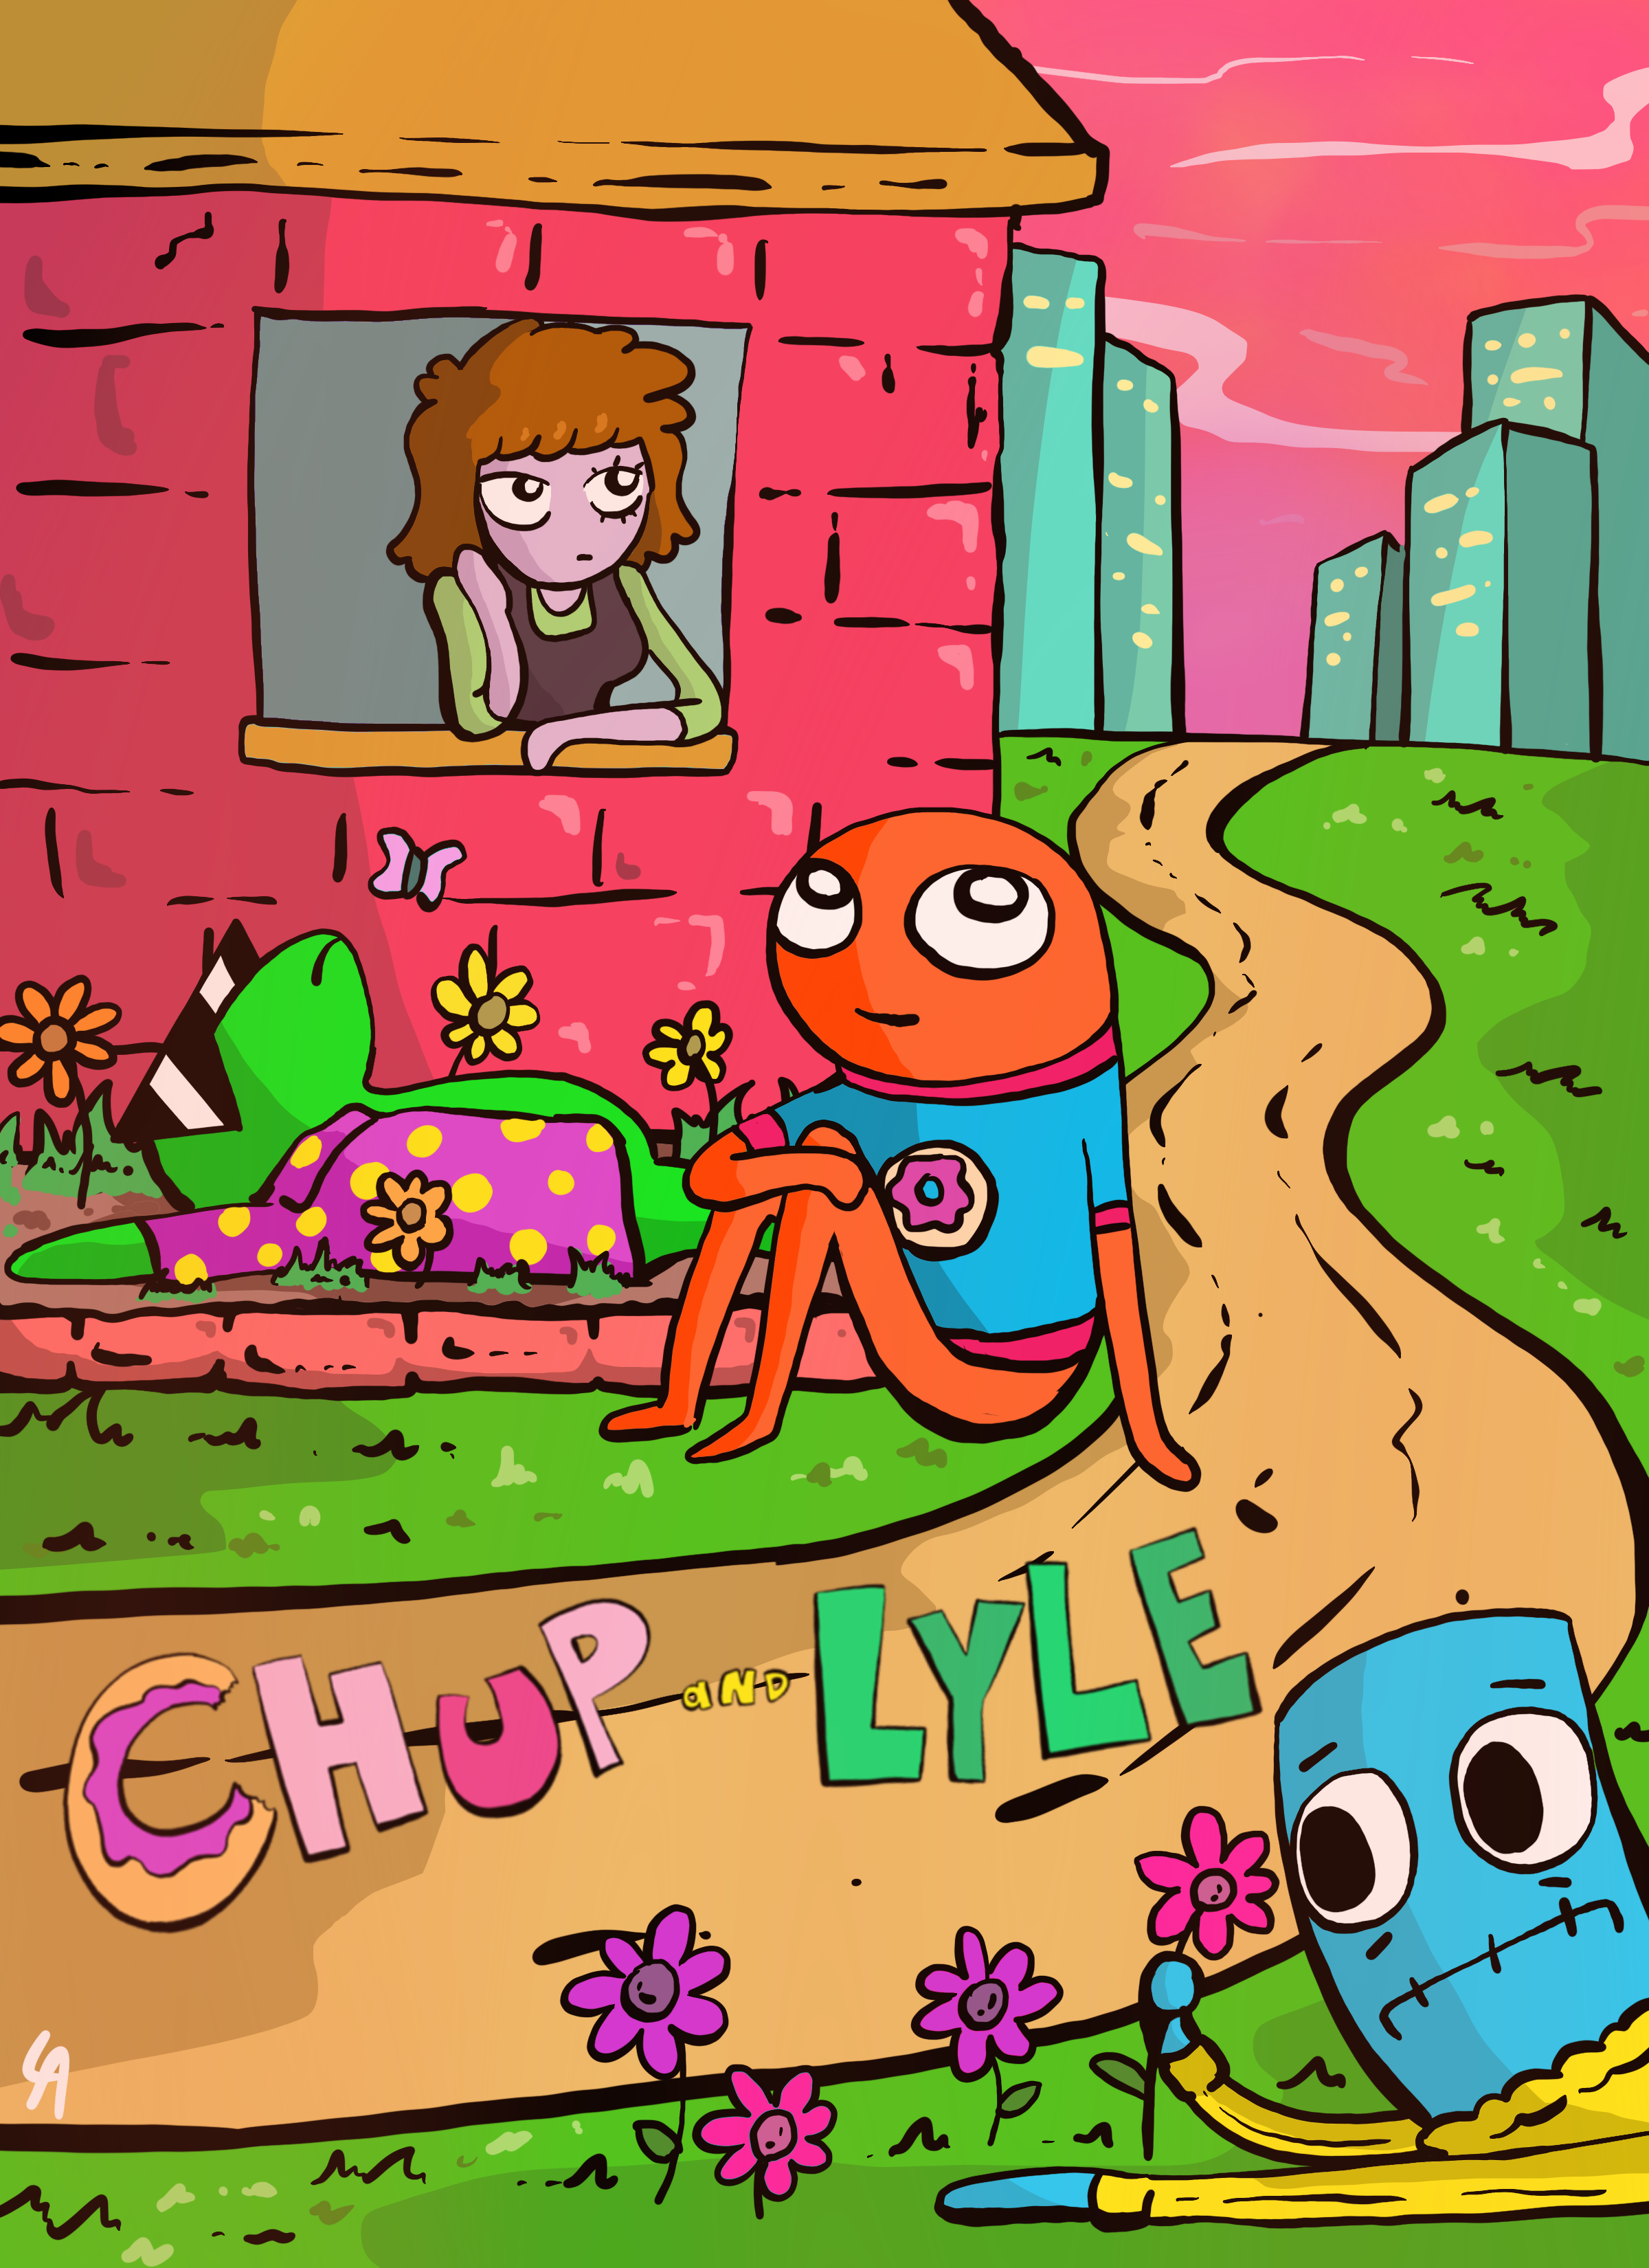 Chup and Lyle — Rad Robot